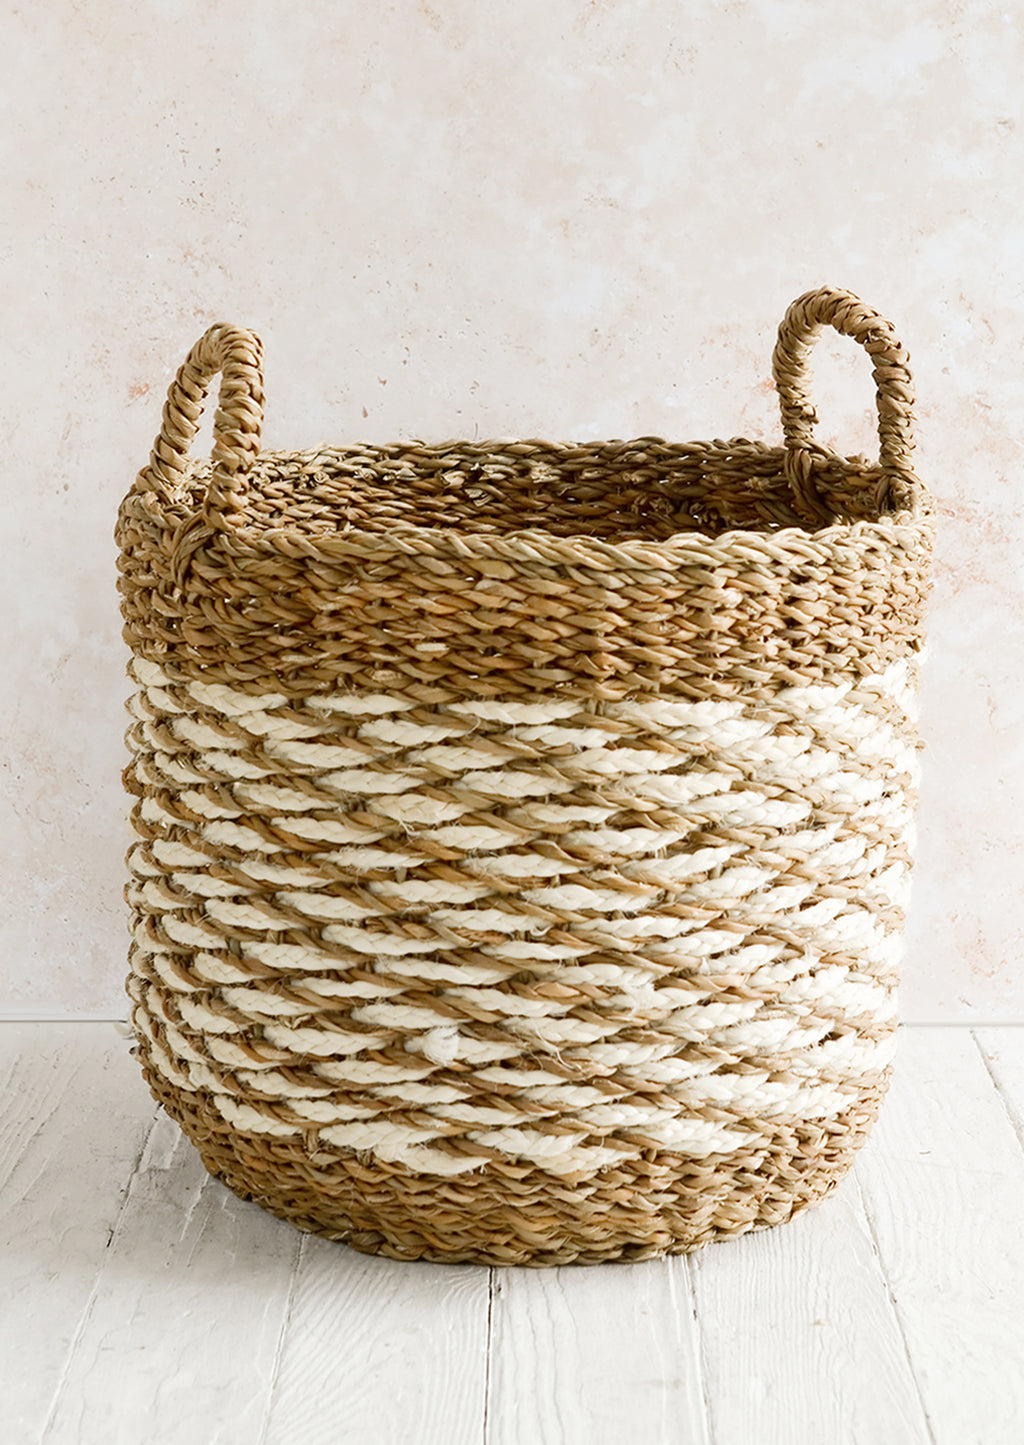 Large [$98.00]: A large open-top round storage basket made from seagrass with braided jute, featuring two handles at top.